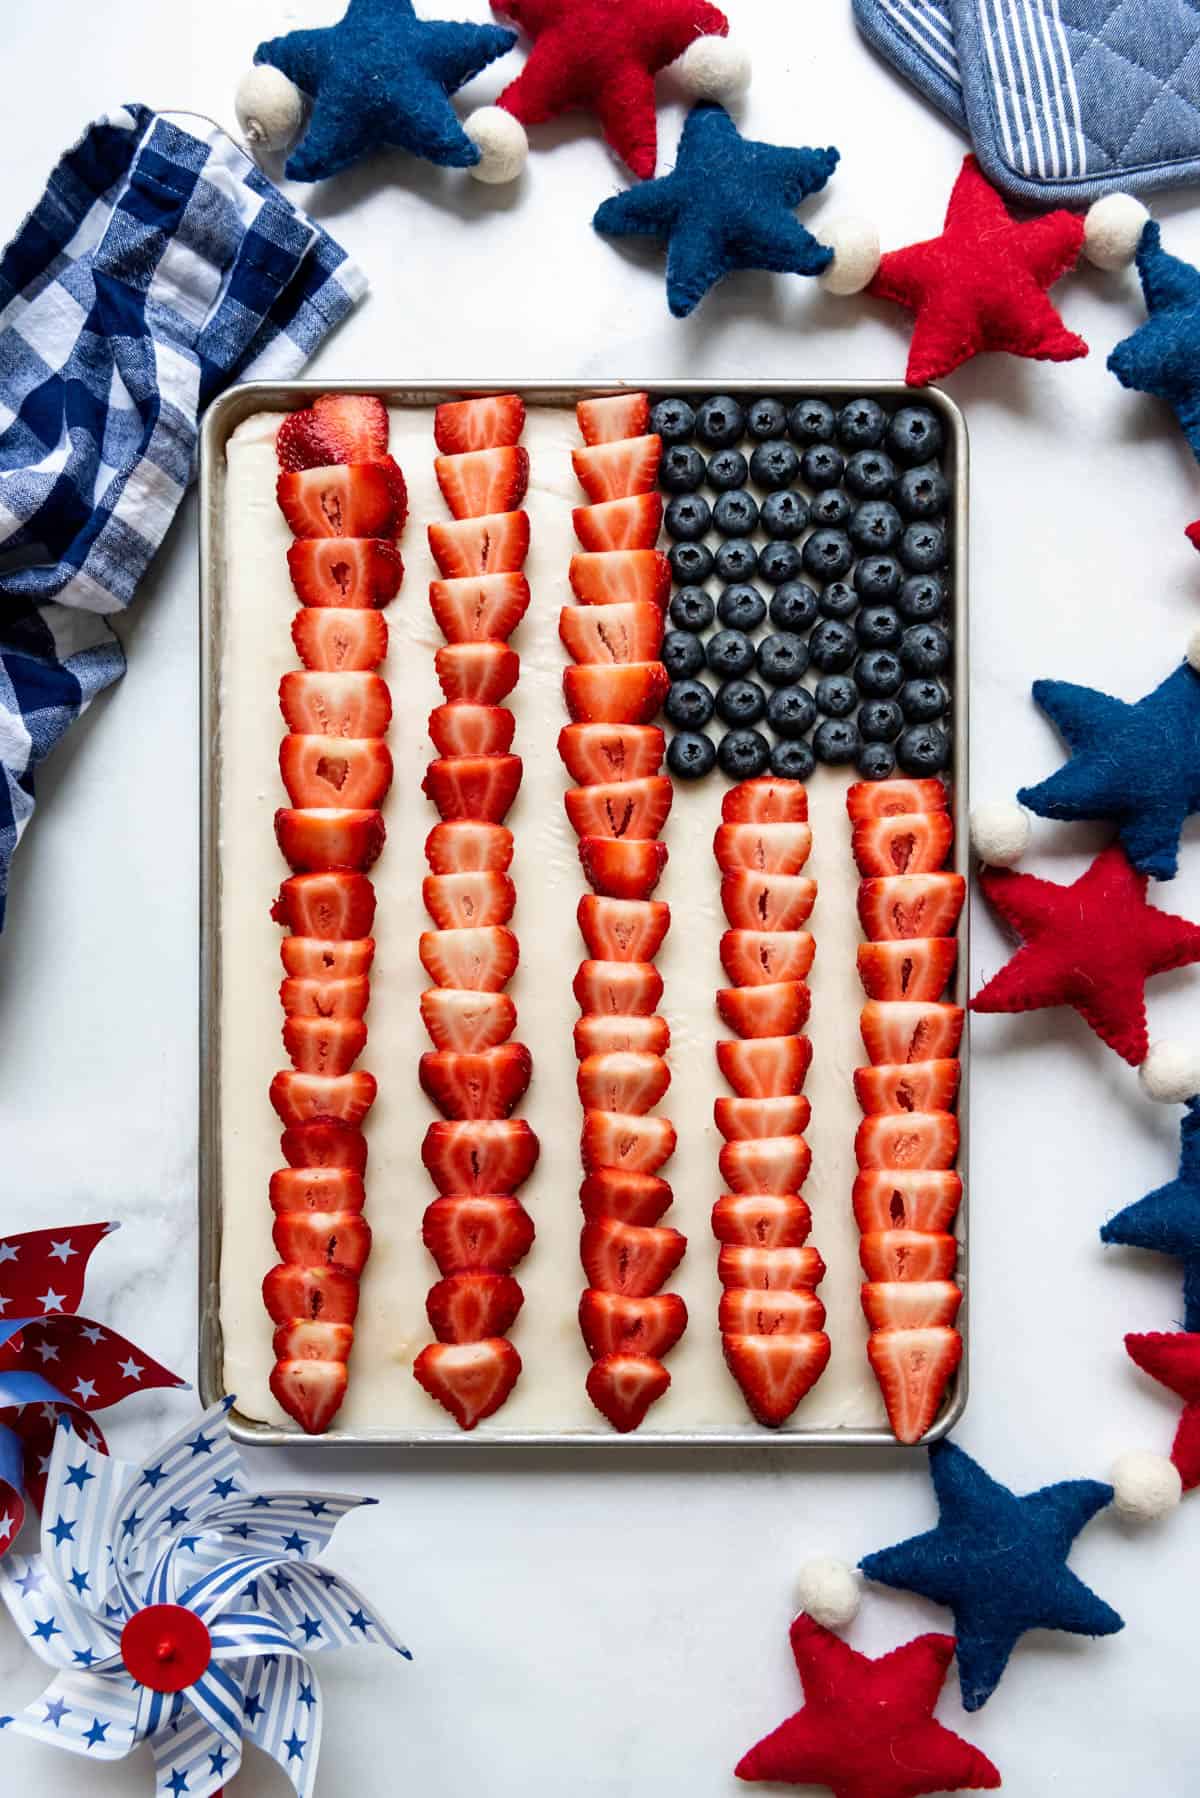 A decorated 4th of July patriotic flag cake.